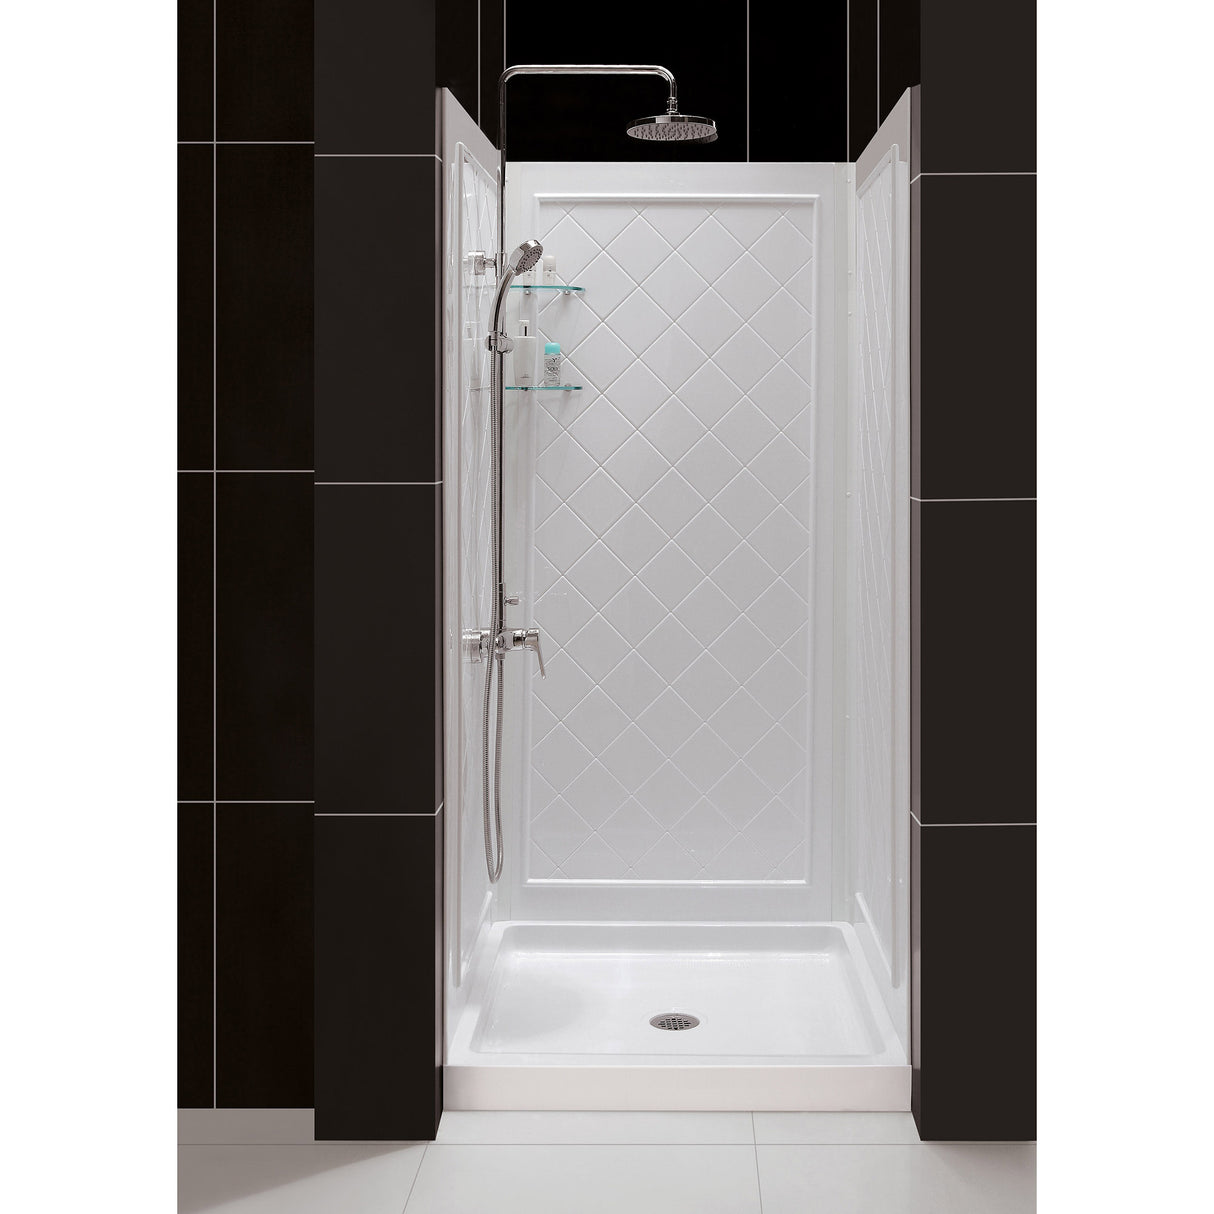 DreamLine Flex 32 in. D x 32 in. W x 76 3/4 in. H Semi-Frameless Shower Door in Brushed Nickel with White Base and Wall Kit